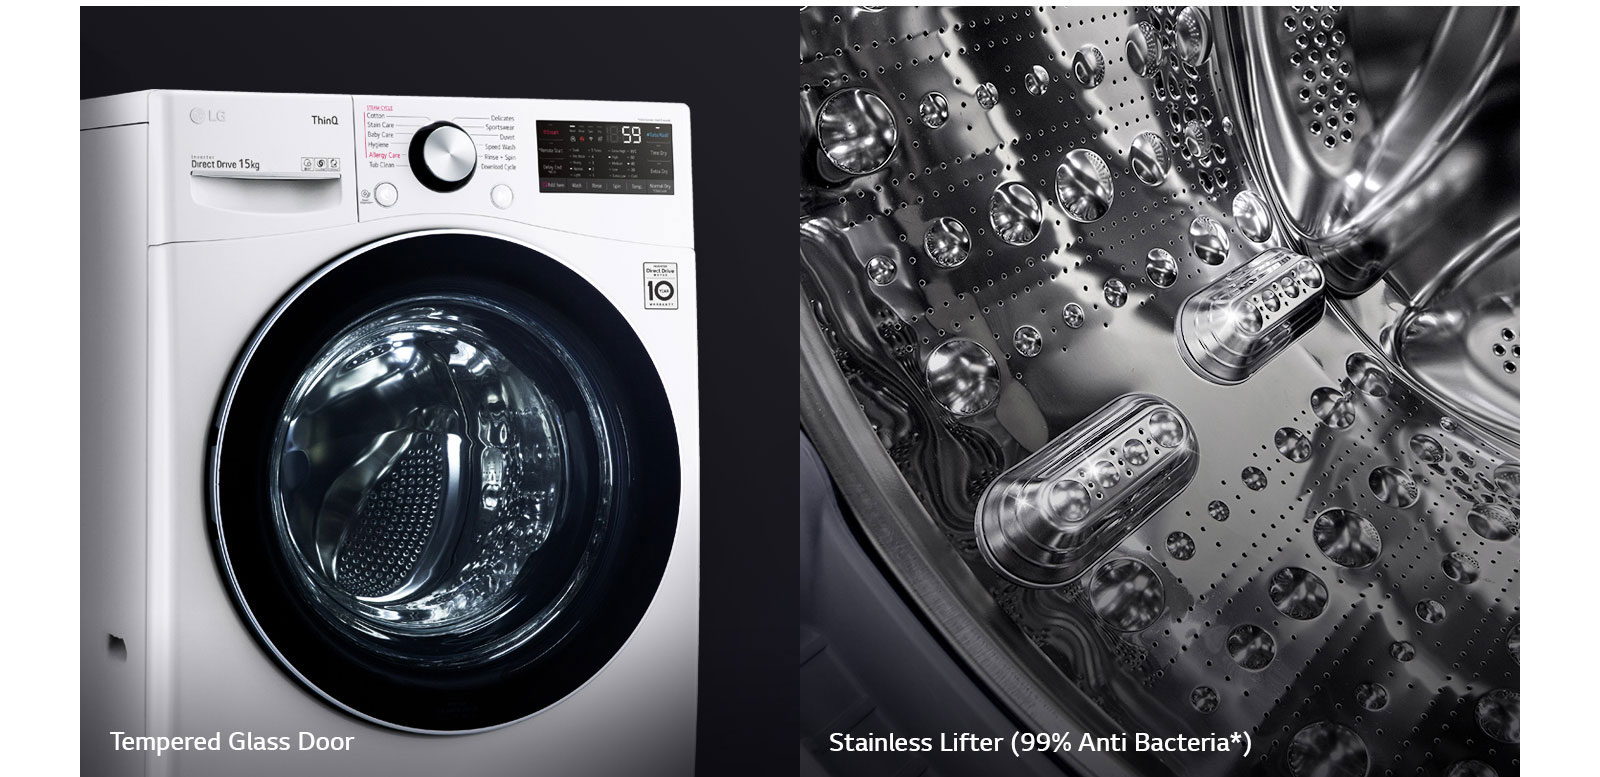 One image shows the front of the washing machine front load washer bringing focus to the tempered glass door. Second image shows the interior of the drum with focus on the stainless steel design.